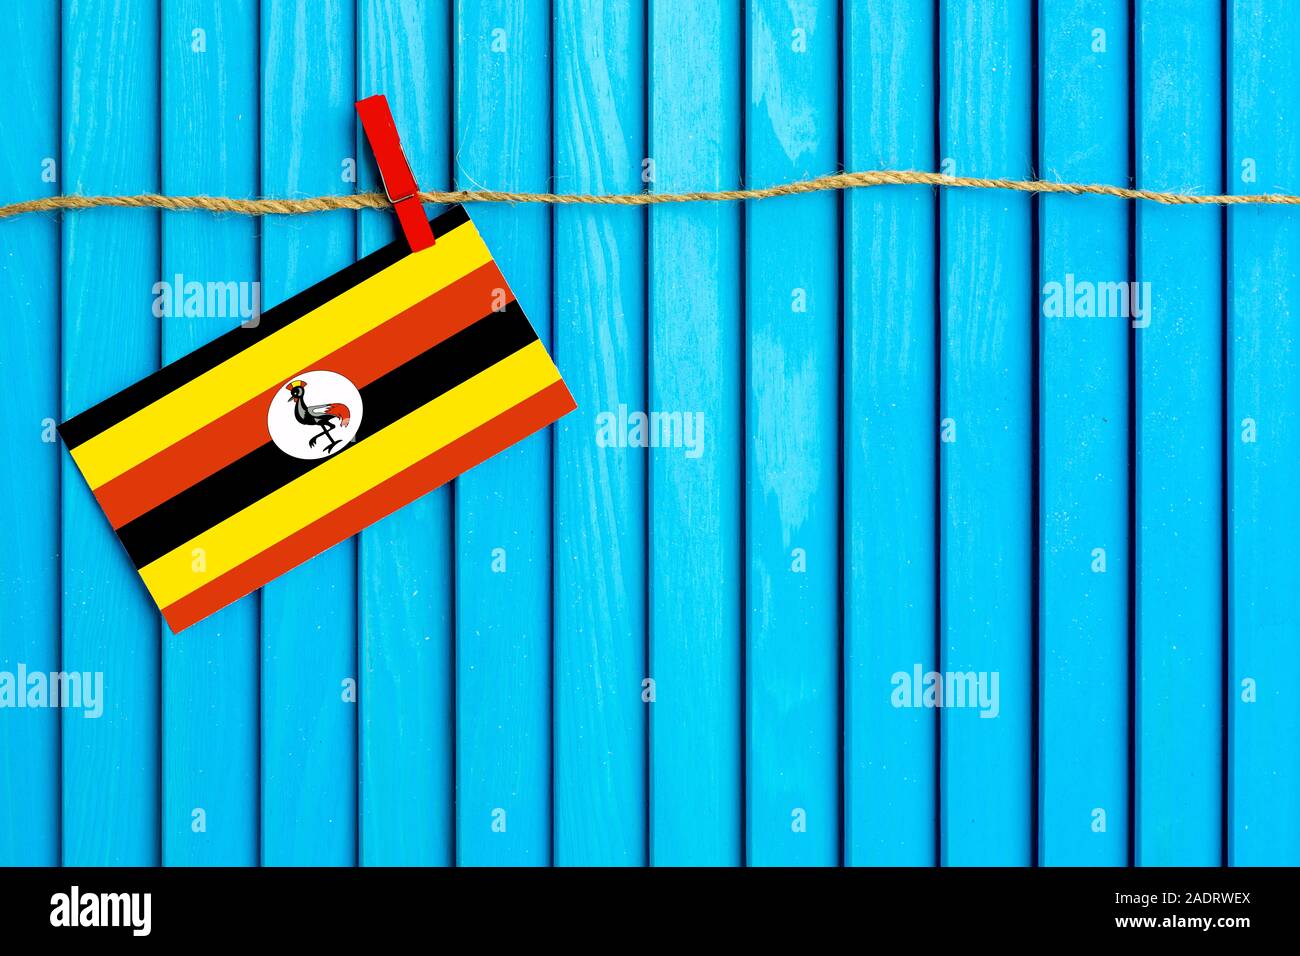 Flag of Uganda hanging on clothesline attached with wooden clothespins on aqua blue wooden background. National day concept. Stock Photo